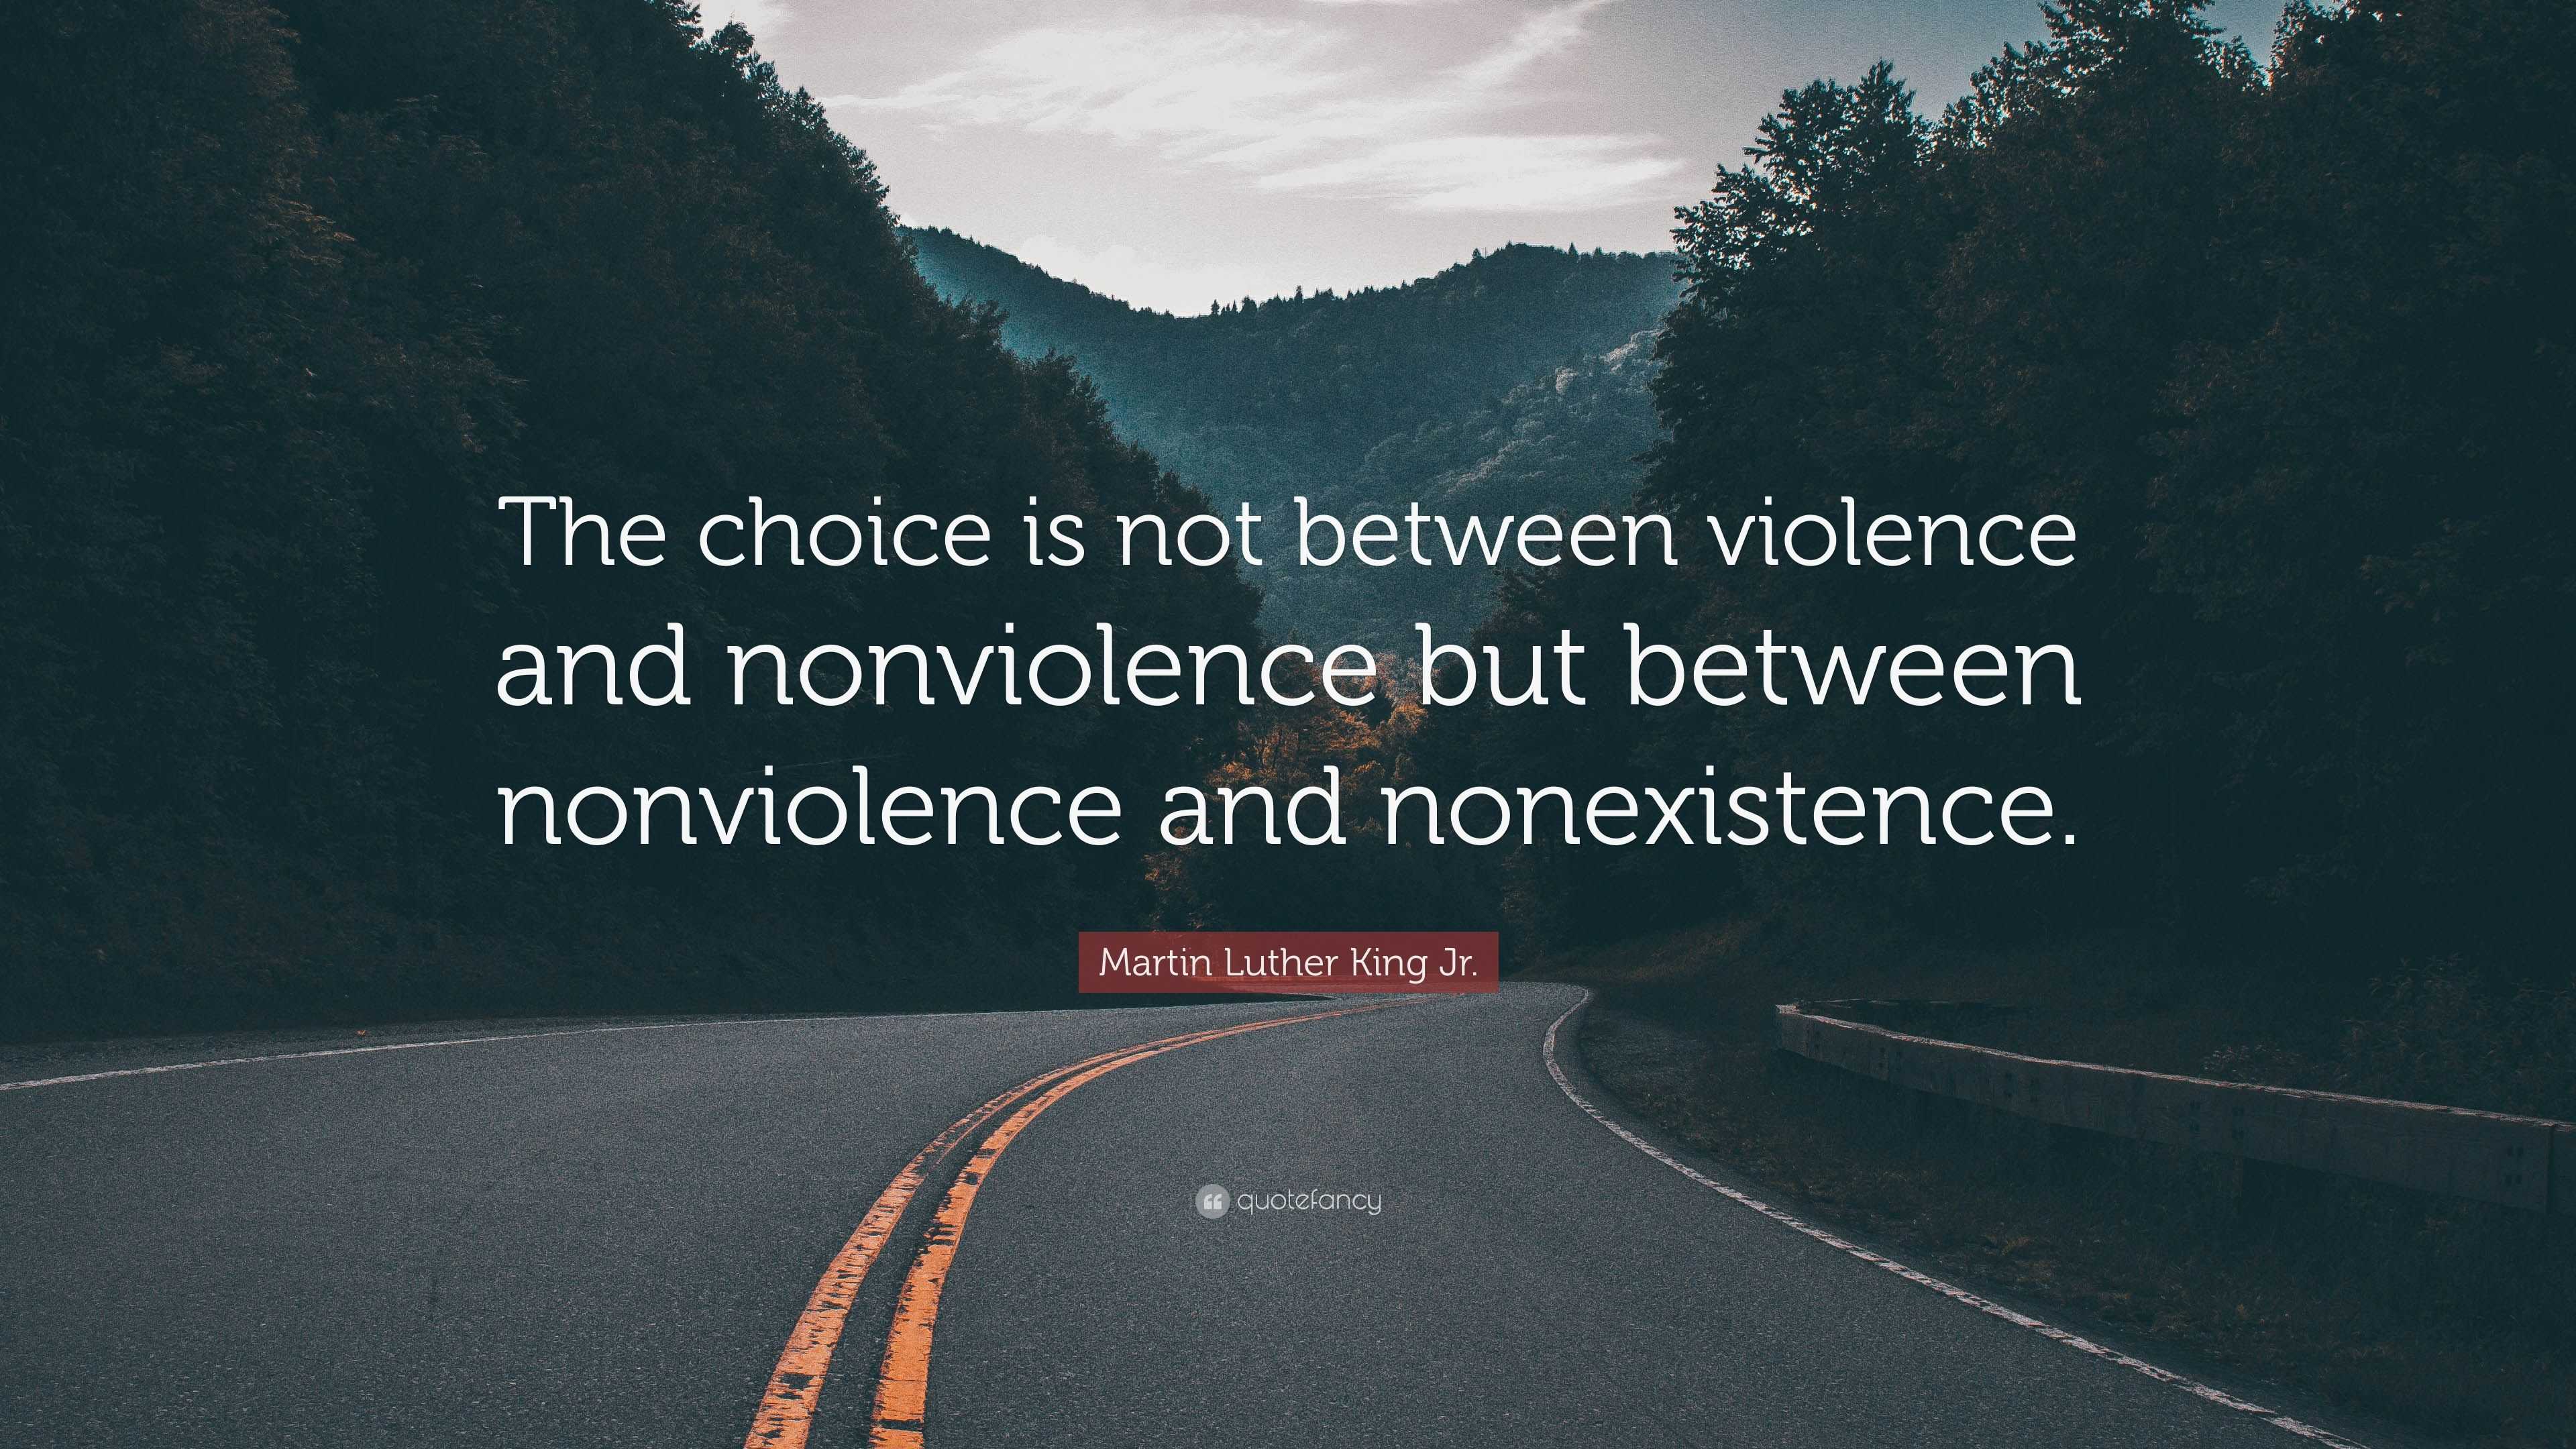 Martin Luther King Jr. Inspired Nonviolence Of Violence